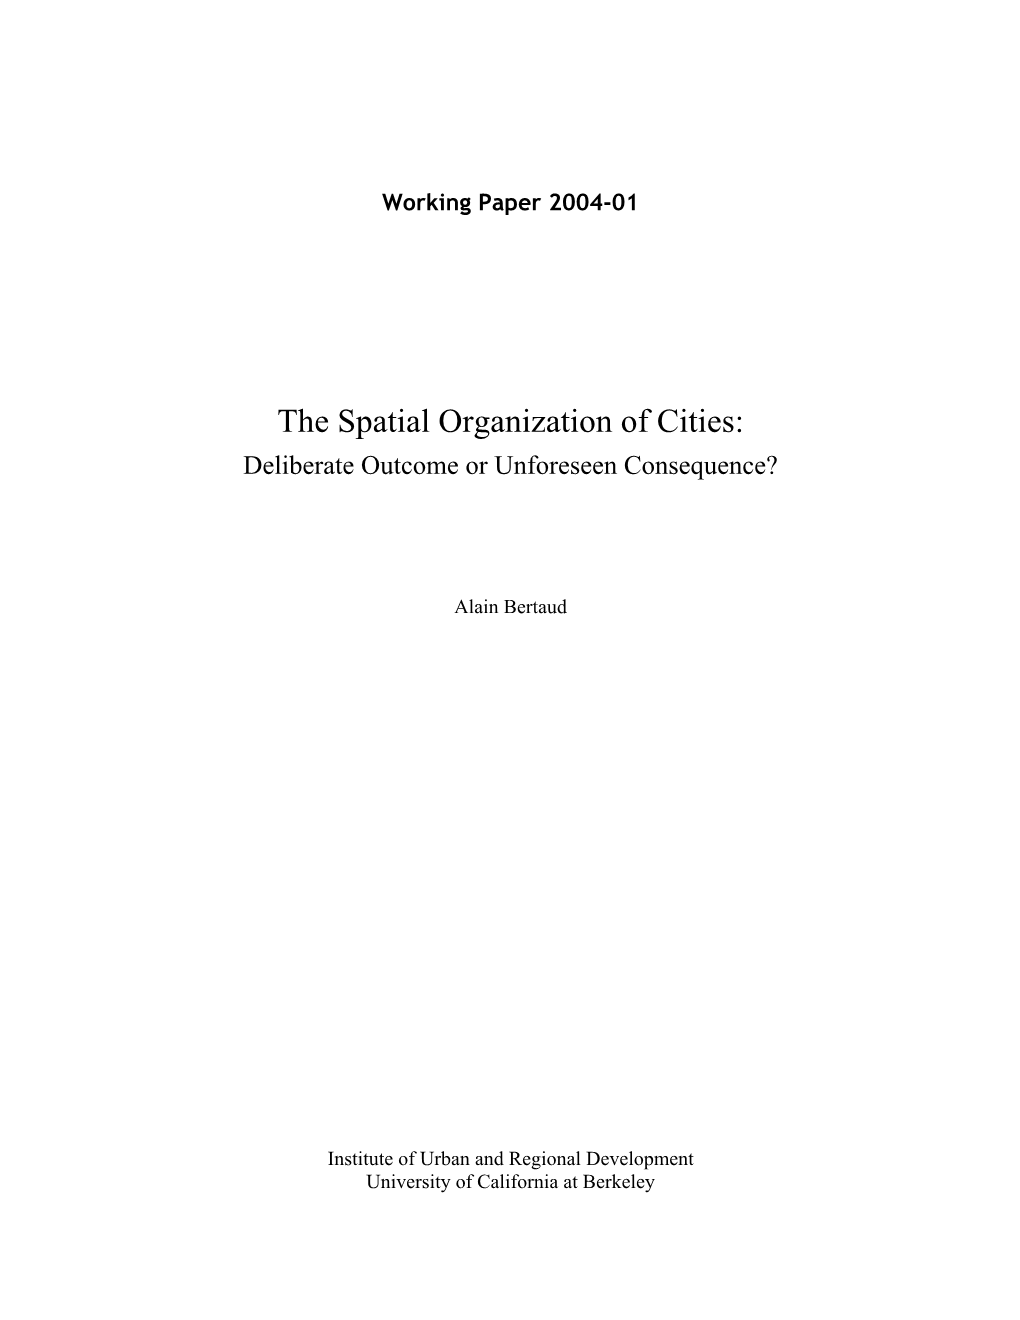 The Spatial Organization of Cities: Deliberate Outcome Or Unforeseen Consequence?